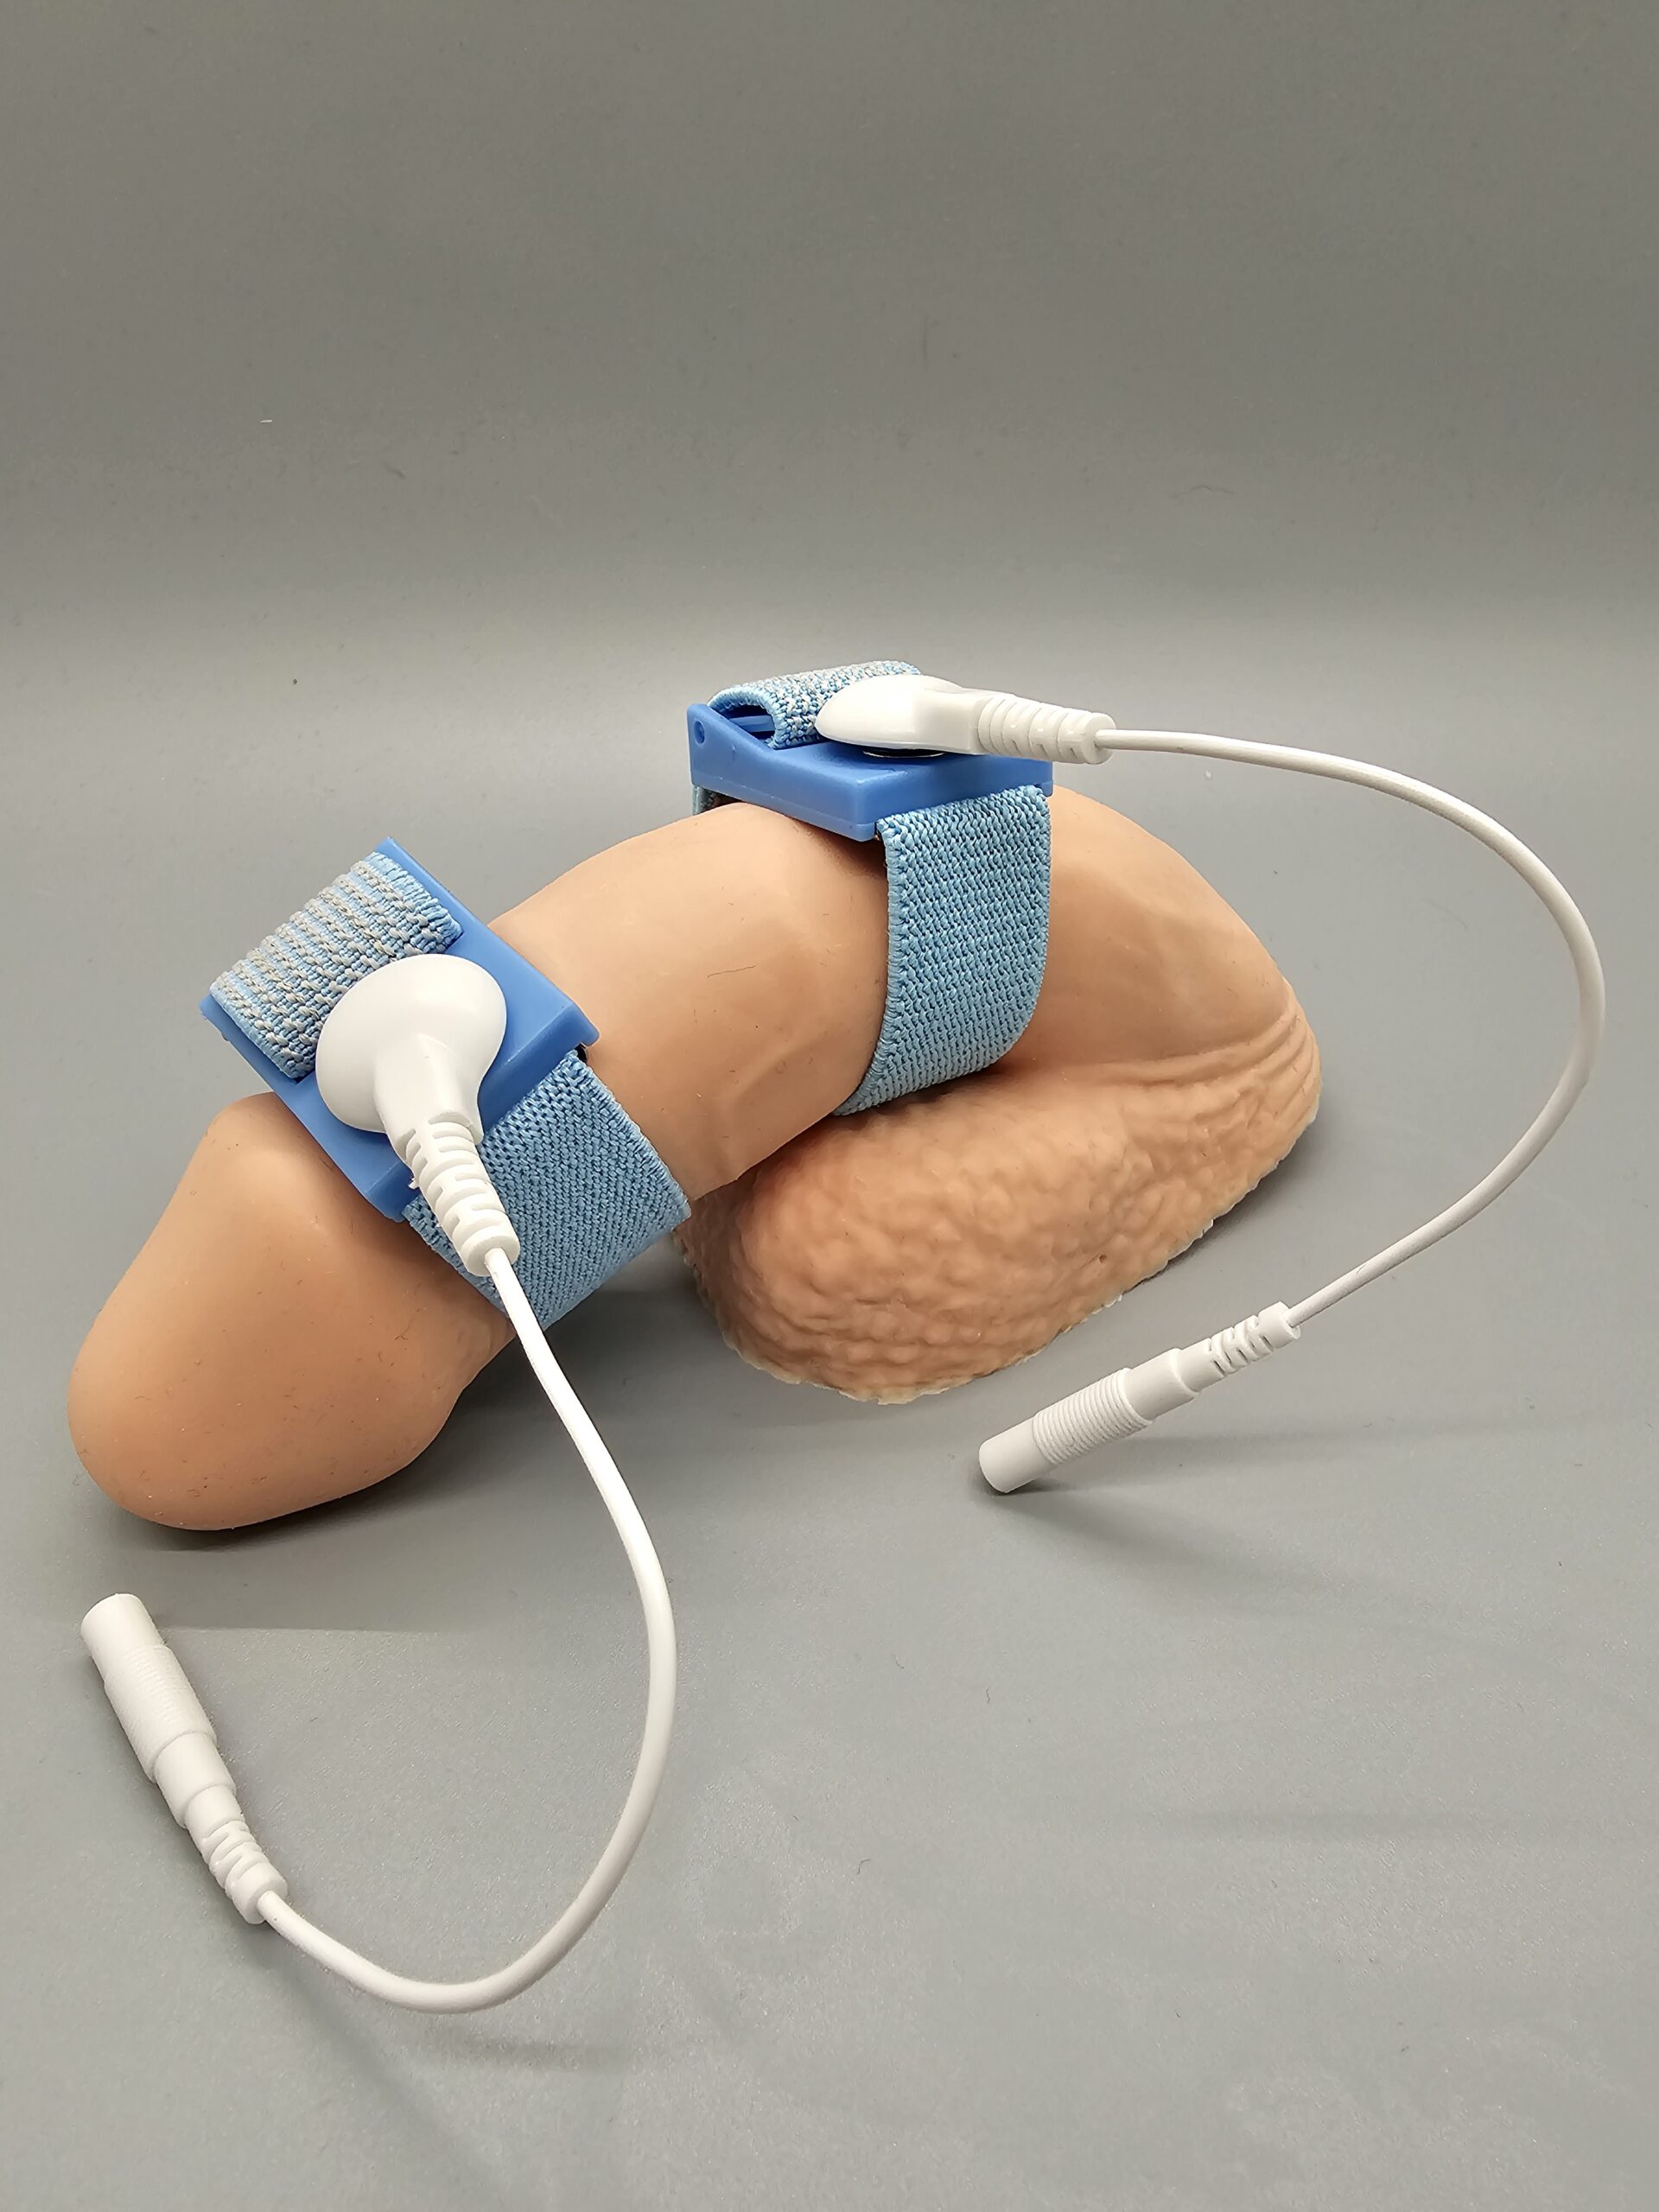 Can You Use a Tens Unit on Your Penis to Improve ED?